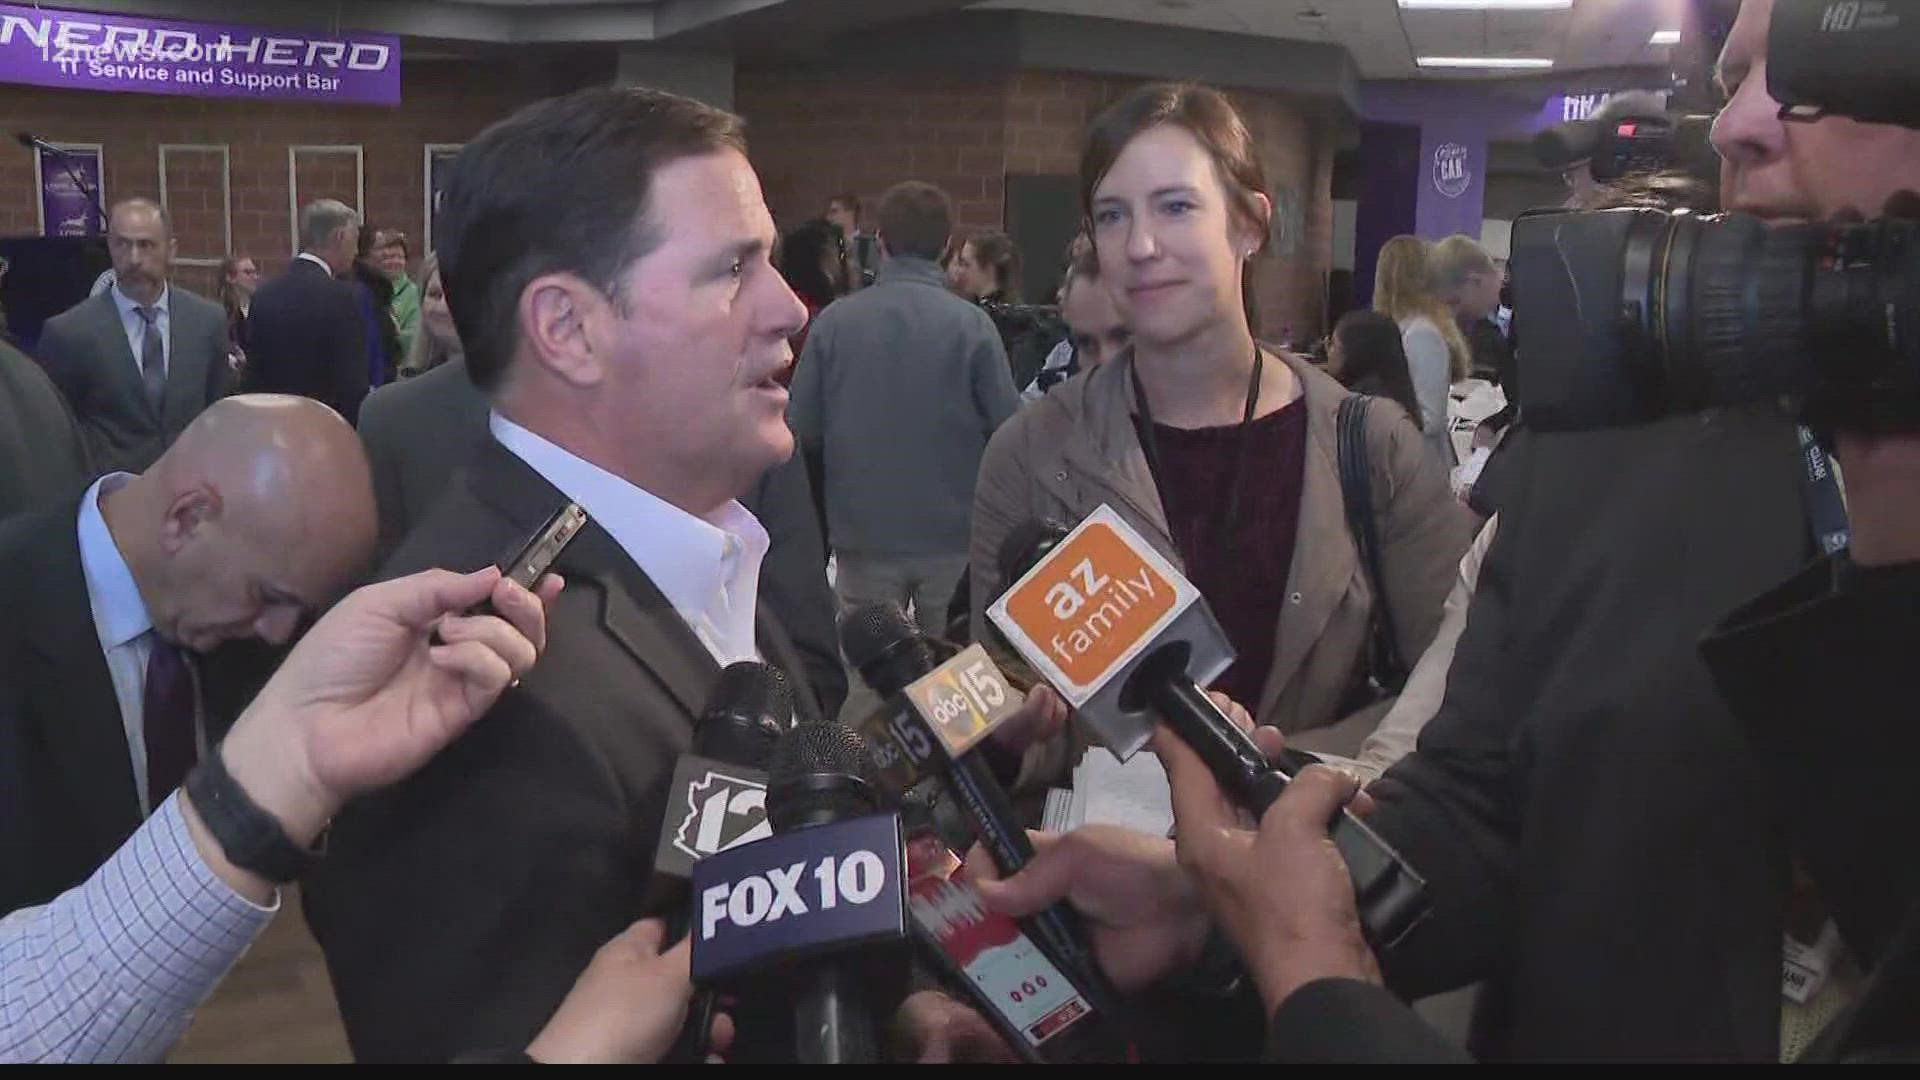 The Department of Homeland Security is warning about potential Russian cyber attacks. Governor Ducey spoke about the state's cyber security readiness on Thursday.